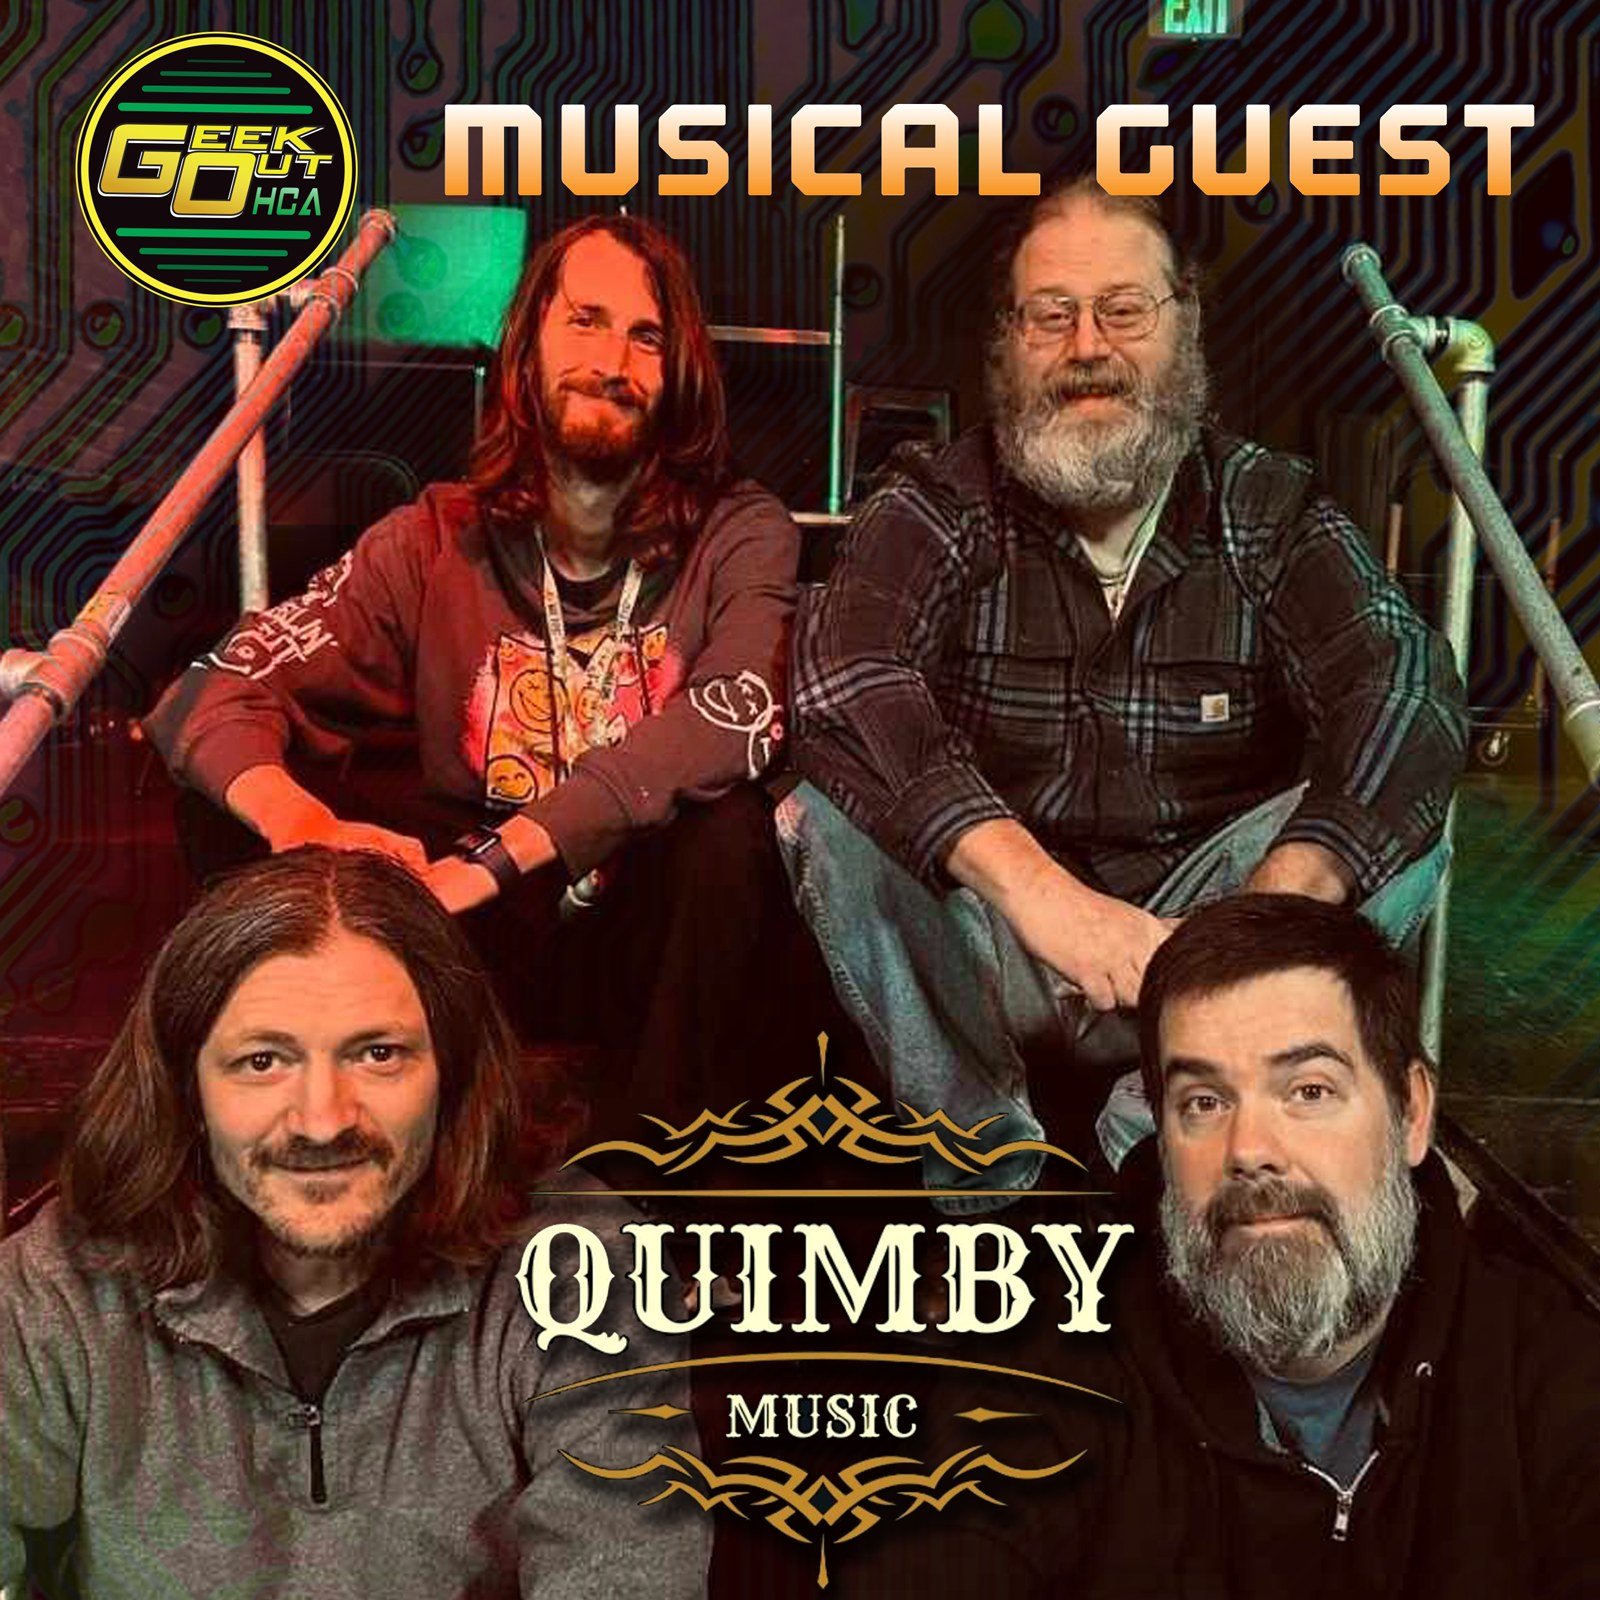   We're excited to announce another musical guest, Quimby! Quimby is a 4 piece jam rock band out of Richmond, Indiana. Coming from diverse backgrounds, a combined 110 years of experience on stage, and a deep love for all music this combination takes 